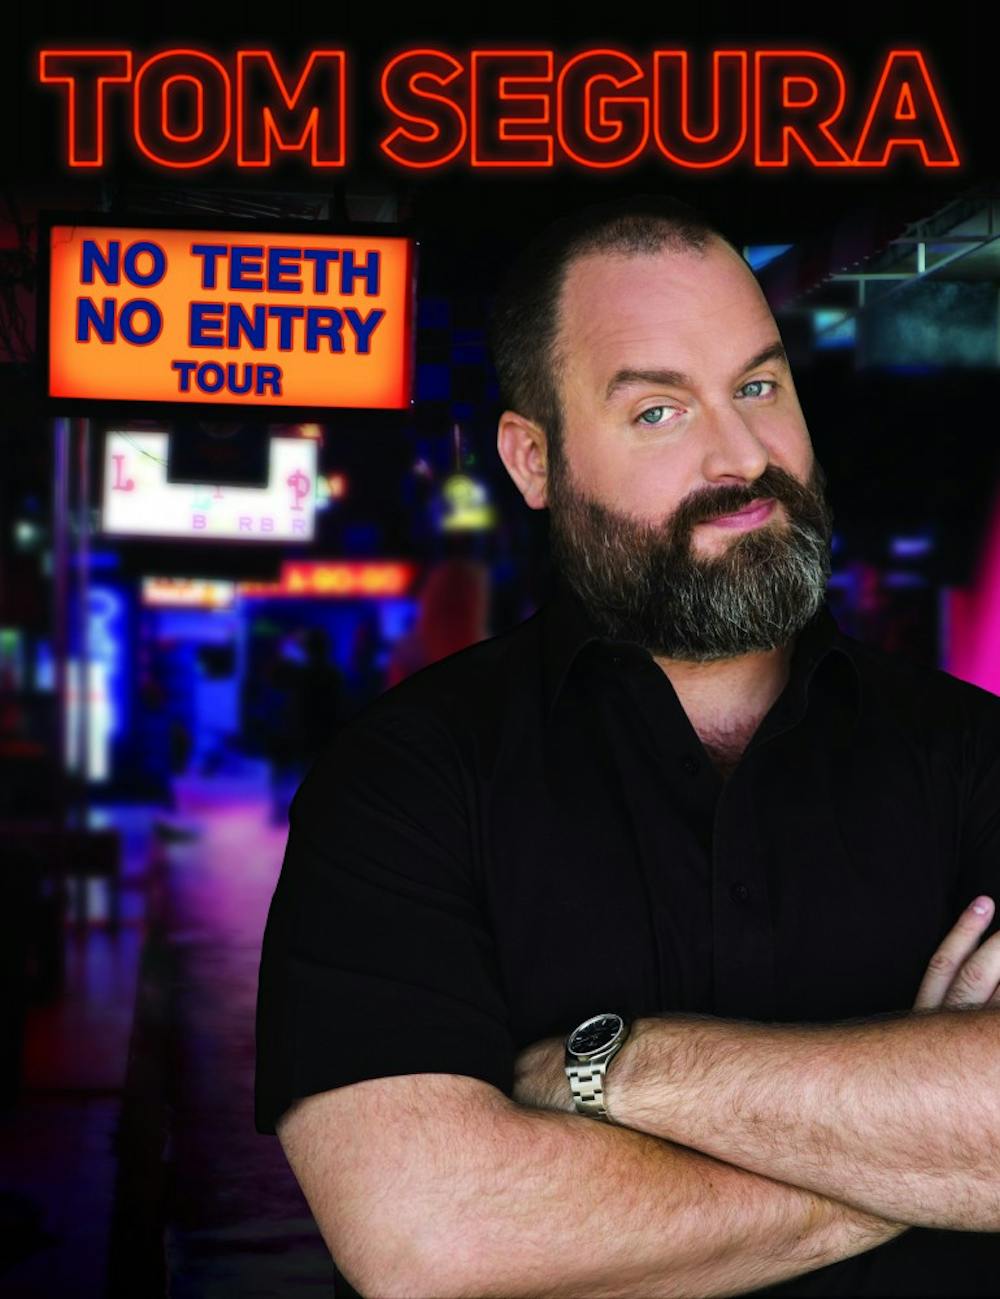 <p>Comedian and entertainer Tom Segura will be headlining a tour stop at the Center for the Arts on Nov. 11. Segura talked with The Spectrum about his comedic style, his podcast and performing in Buffalo.</p>